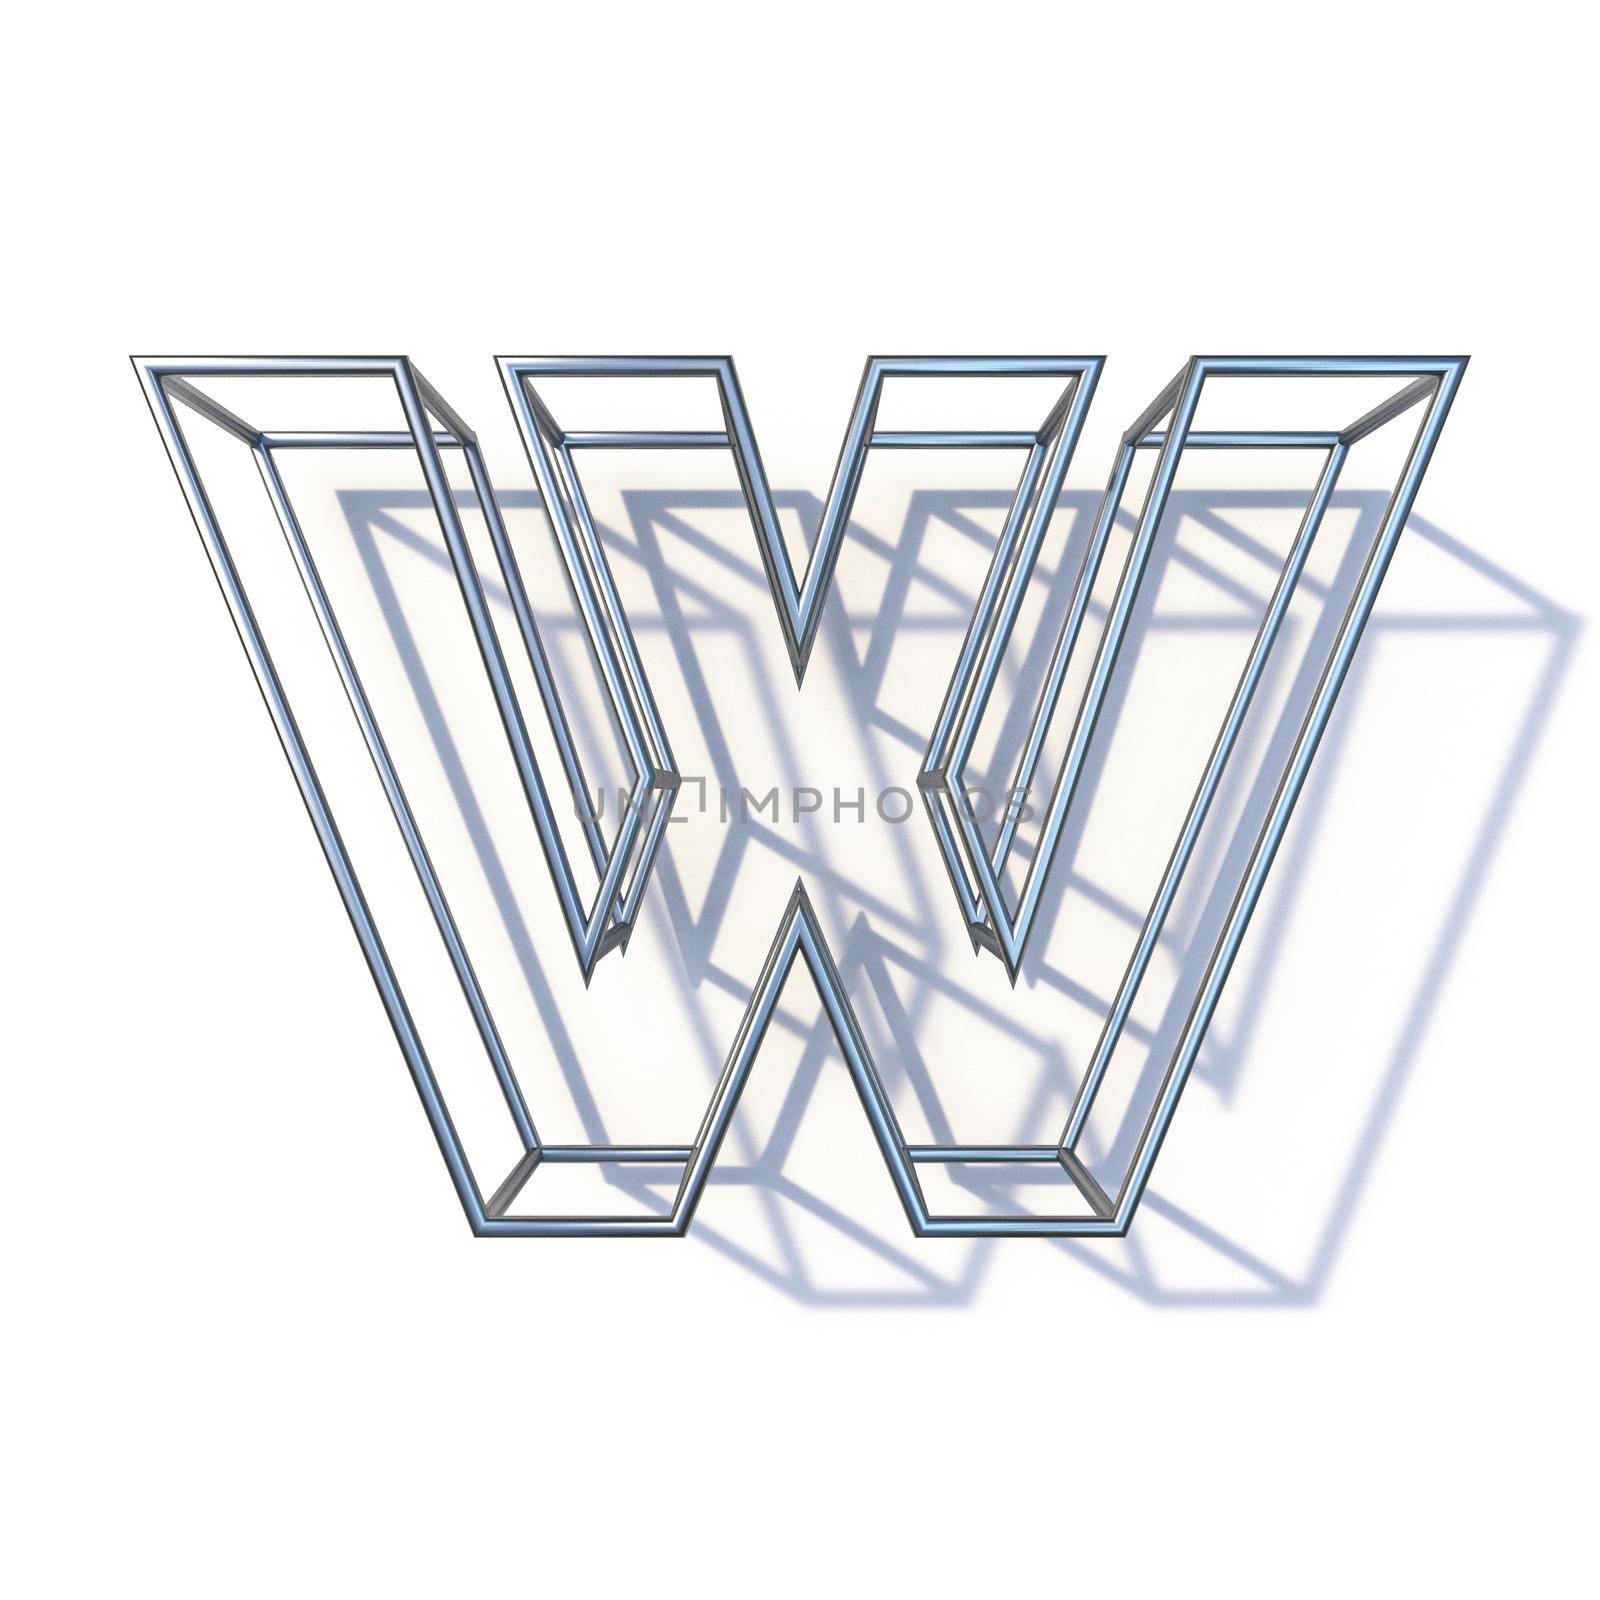 Steel wire frame font Letter W 3D render illustration isolated on white background